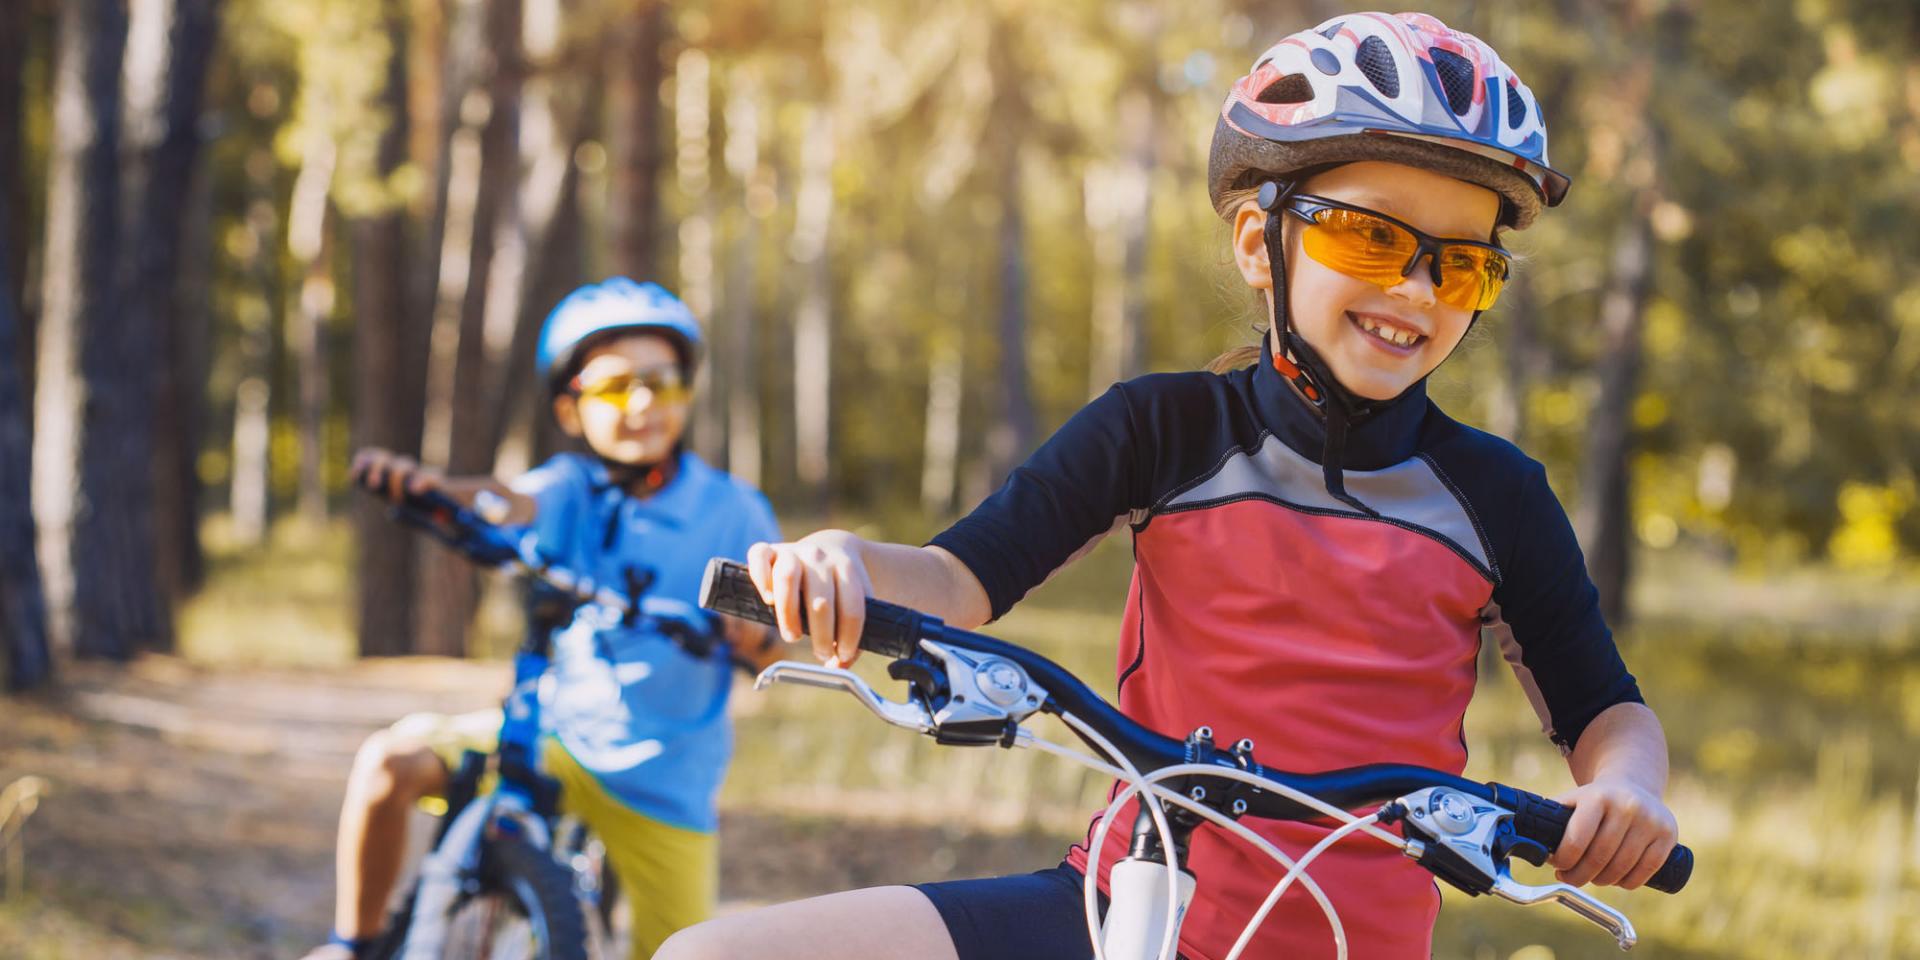 Kids on a bicycles in the sunny forest. children cycling outdoors in helmet